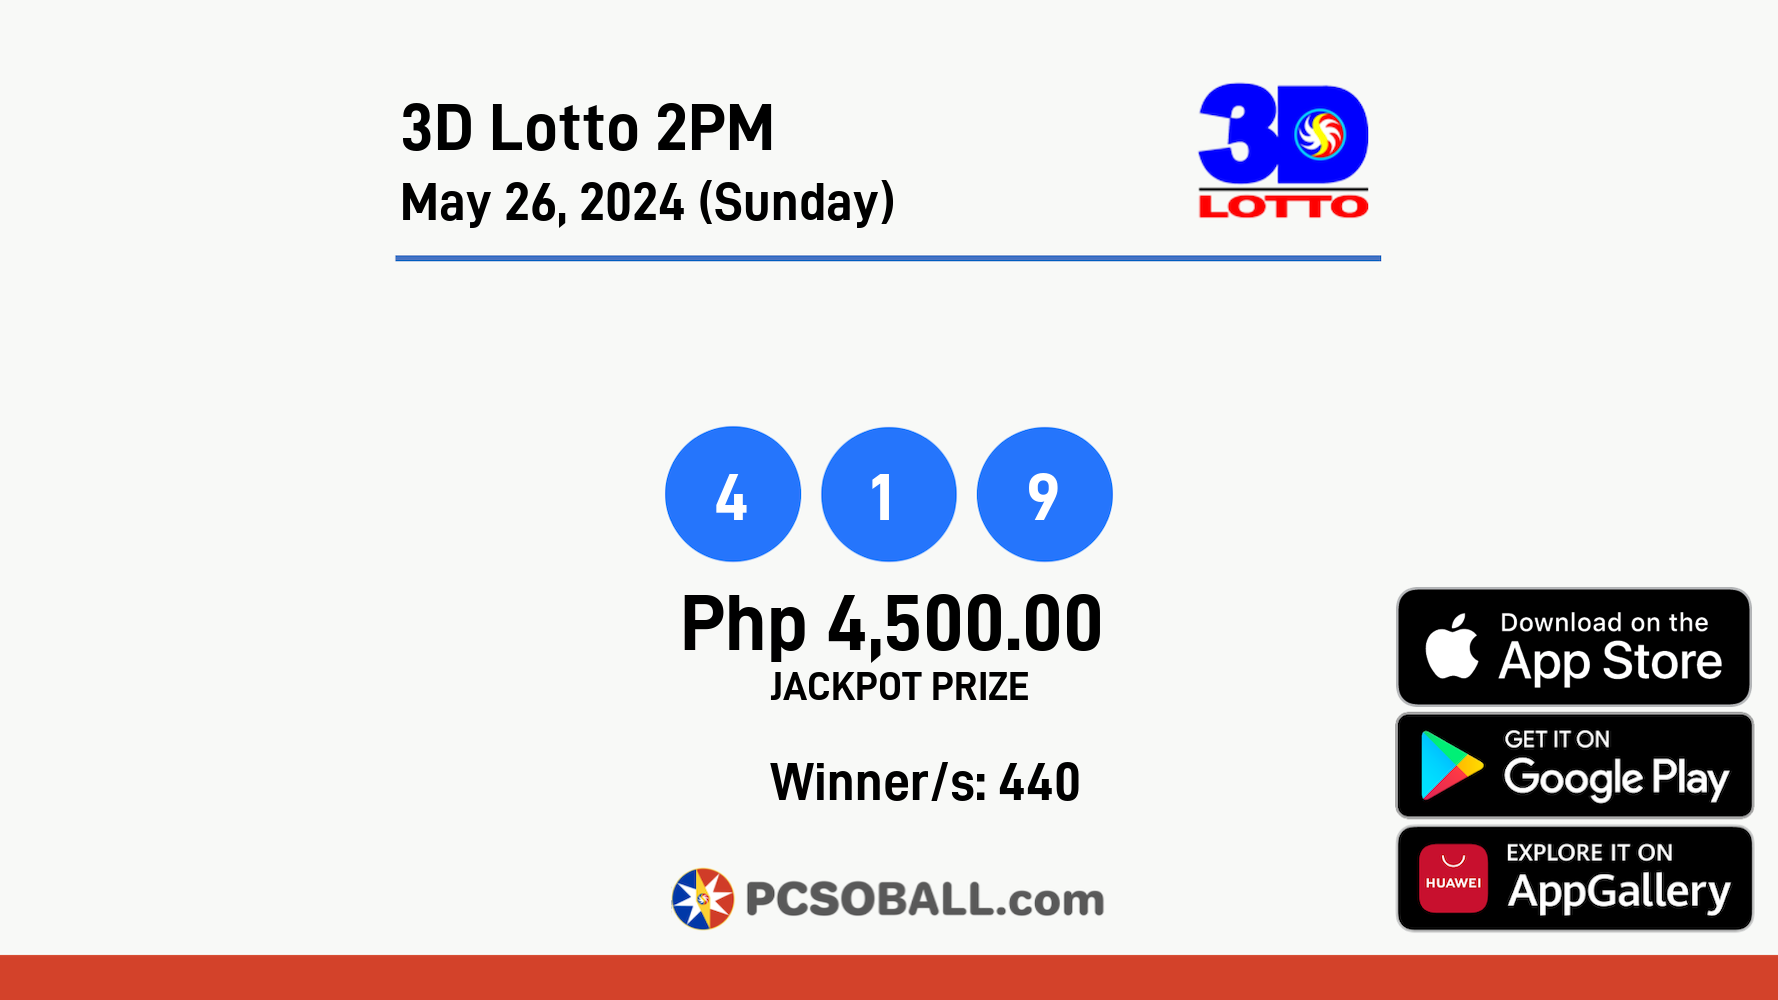 3D Lotto 2PM May 26, 2024 (Sunday) Result